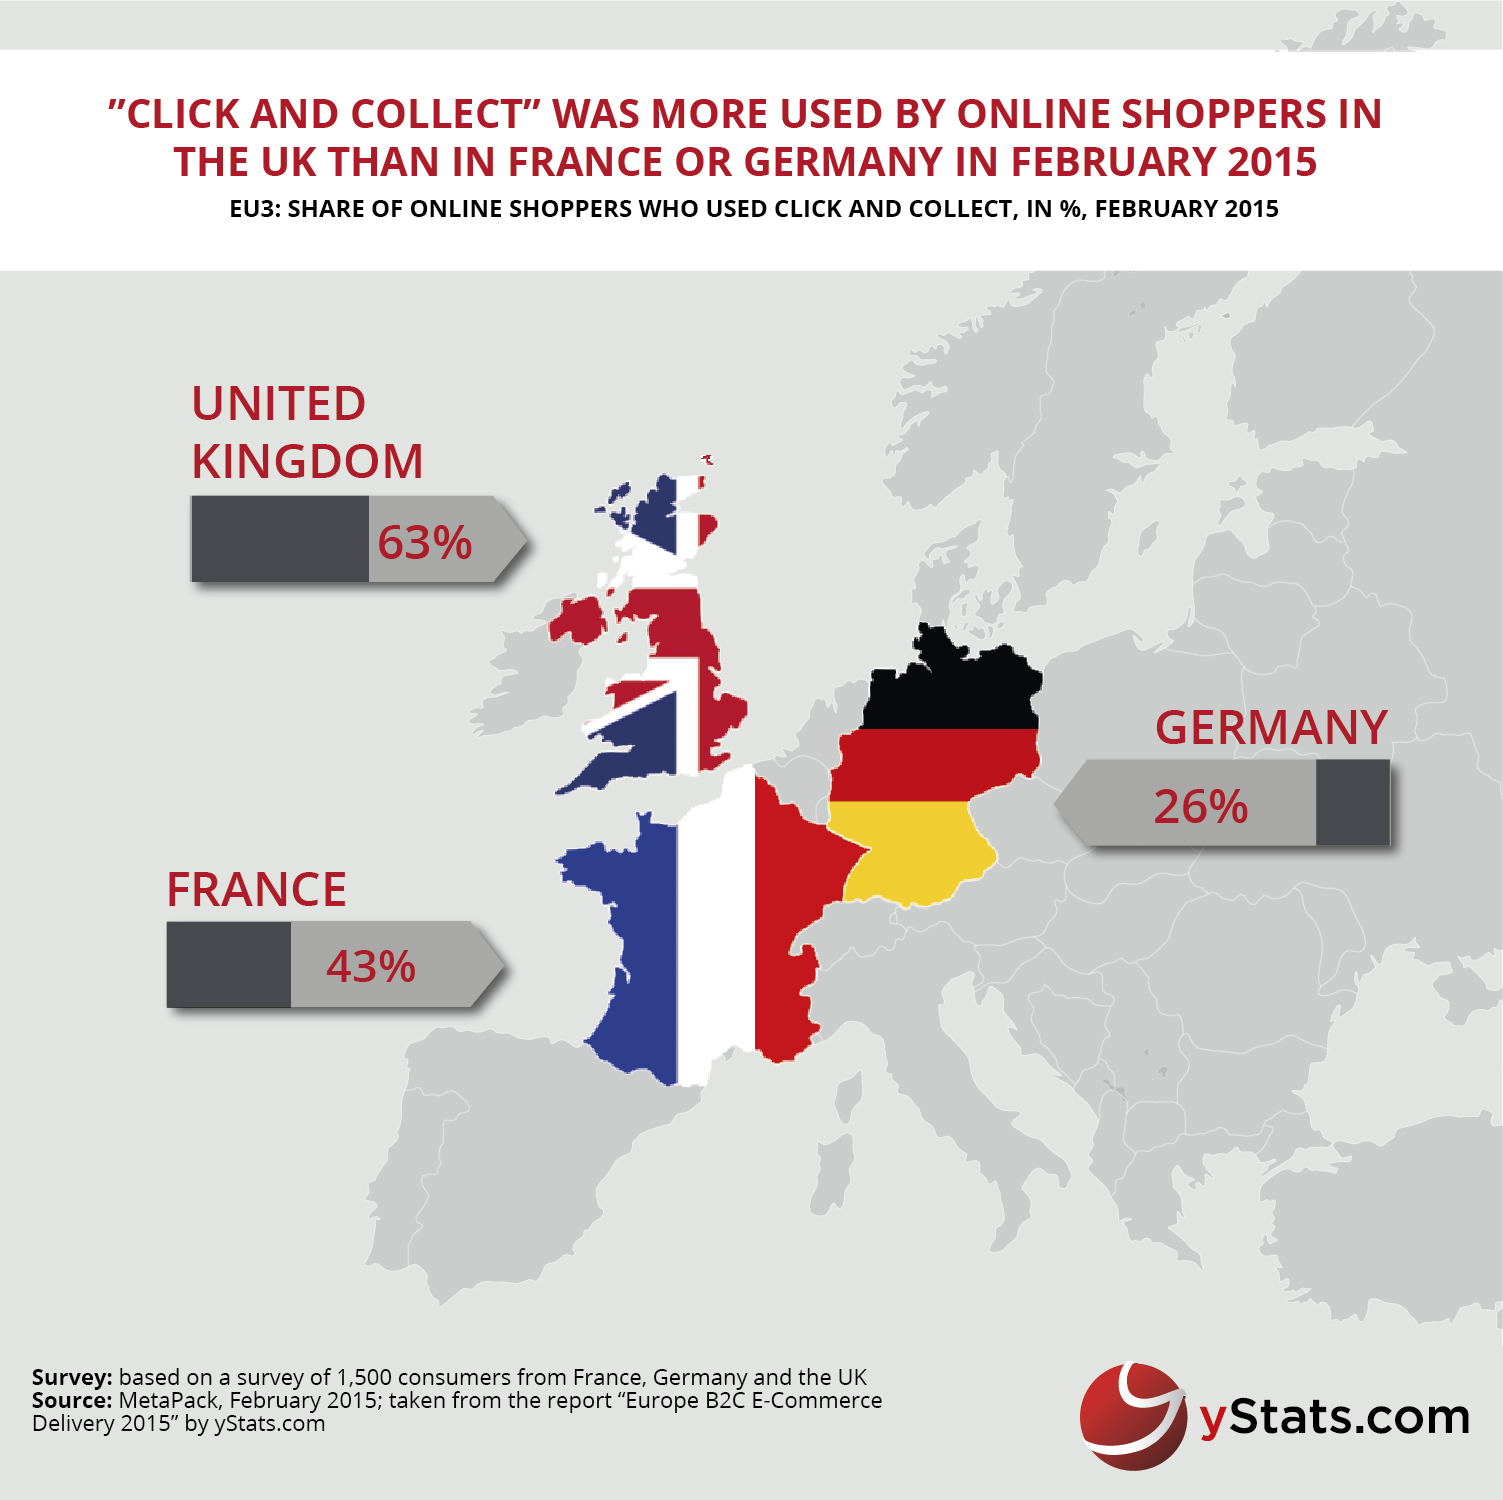 online shoppers use click and collect in europe